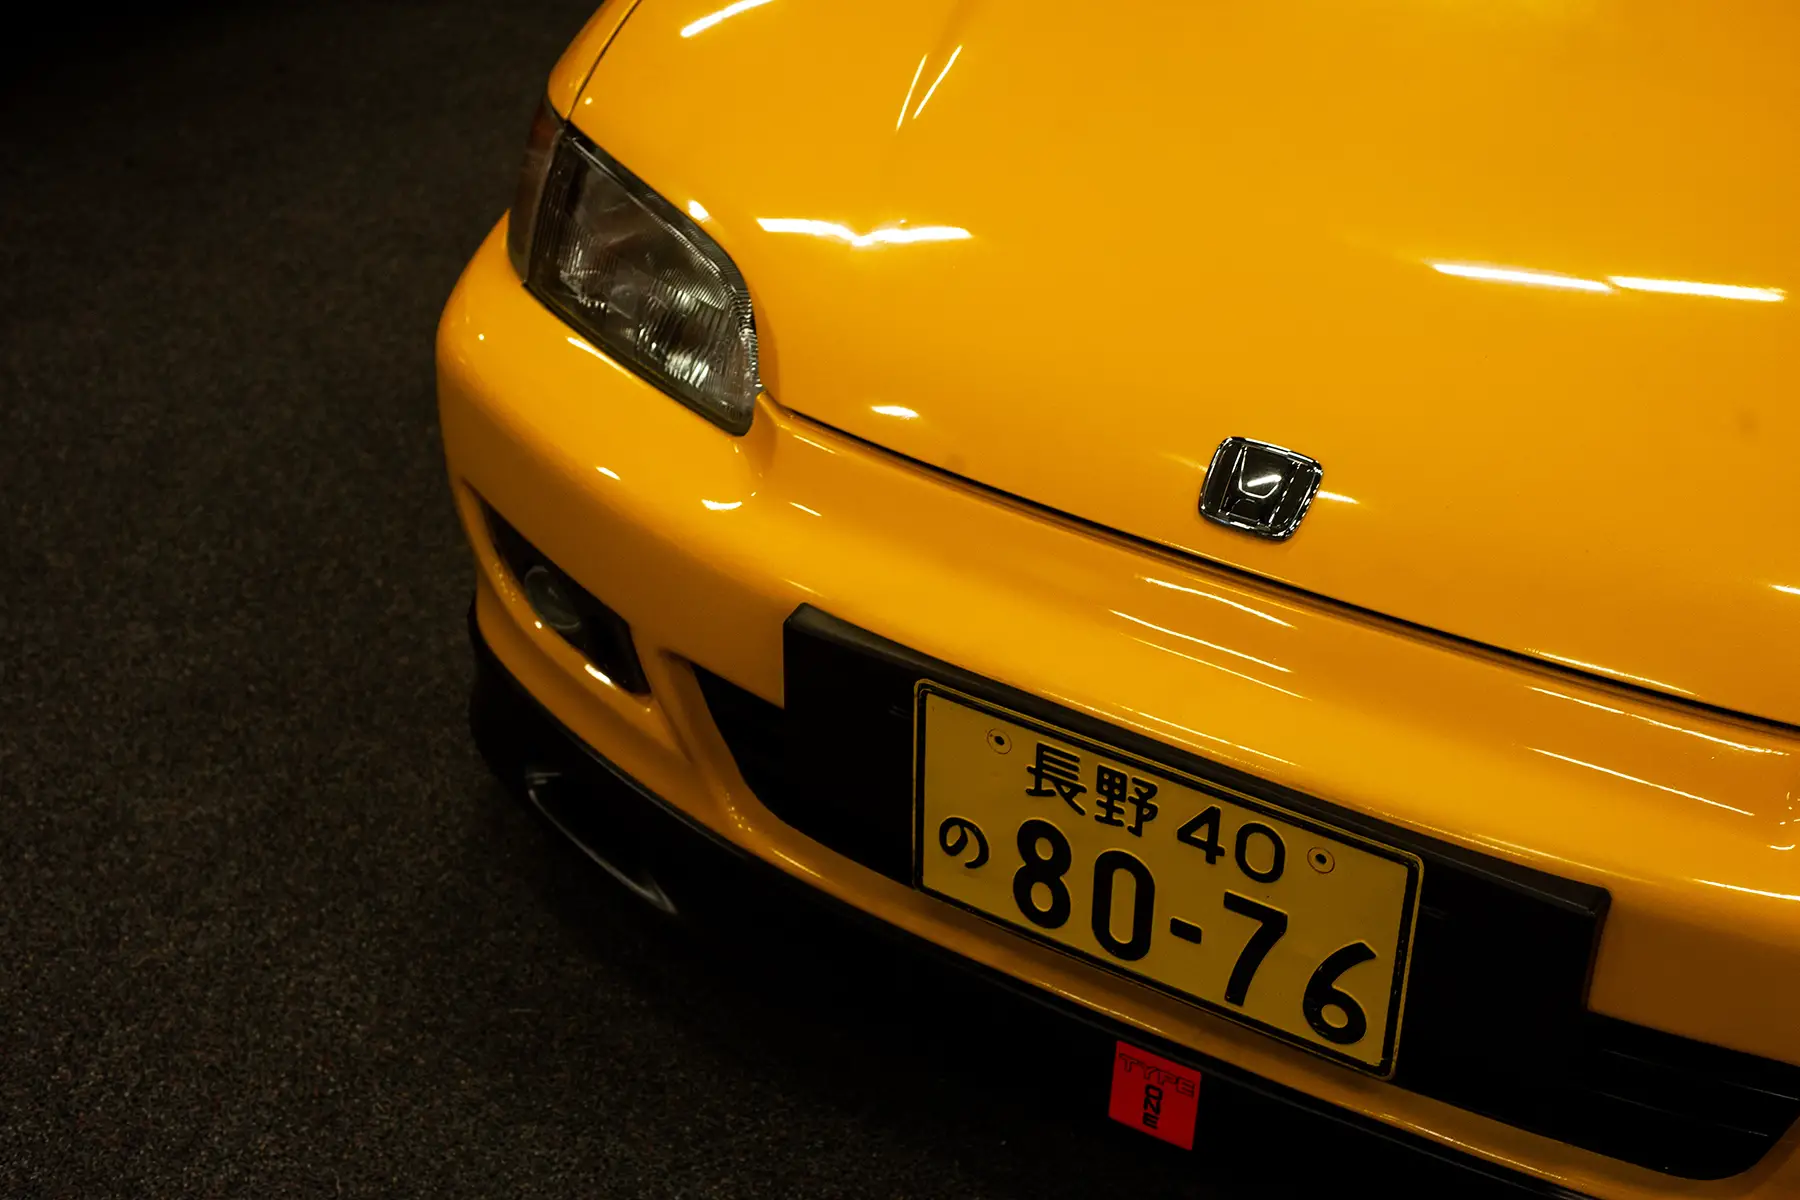 Close-up of a yellow Honda with a Japanese license plate